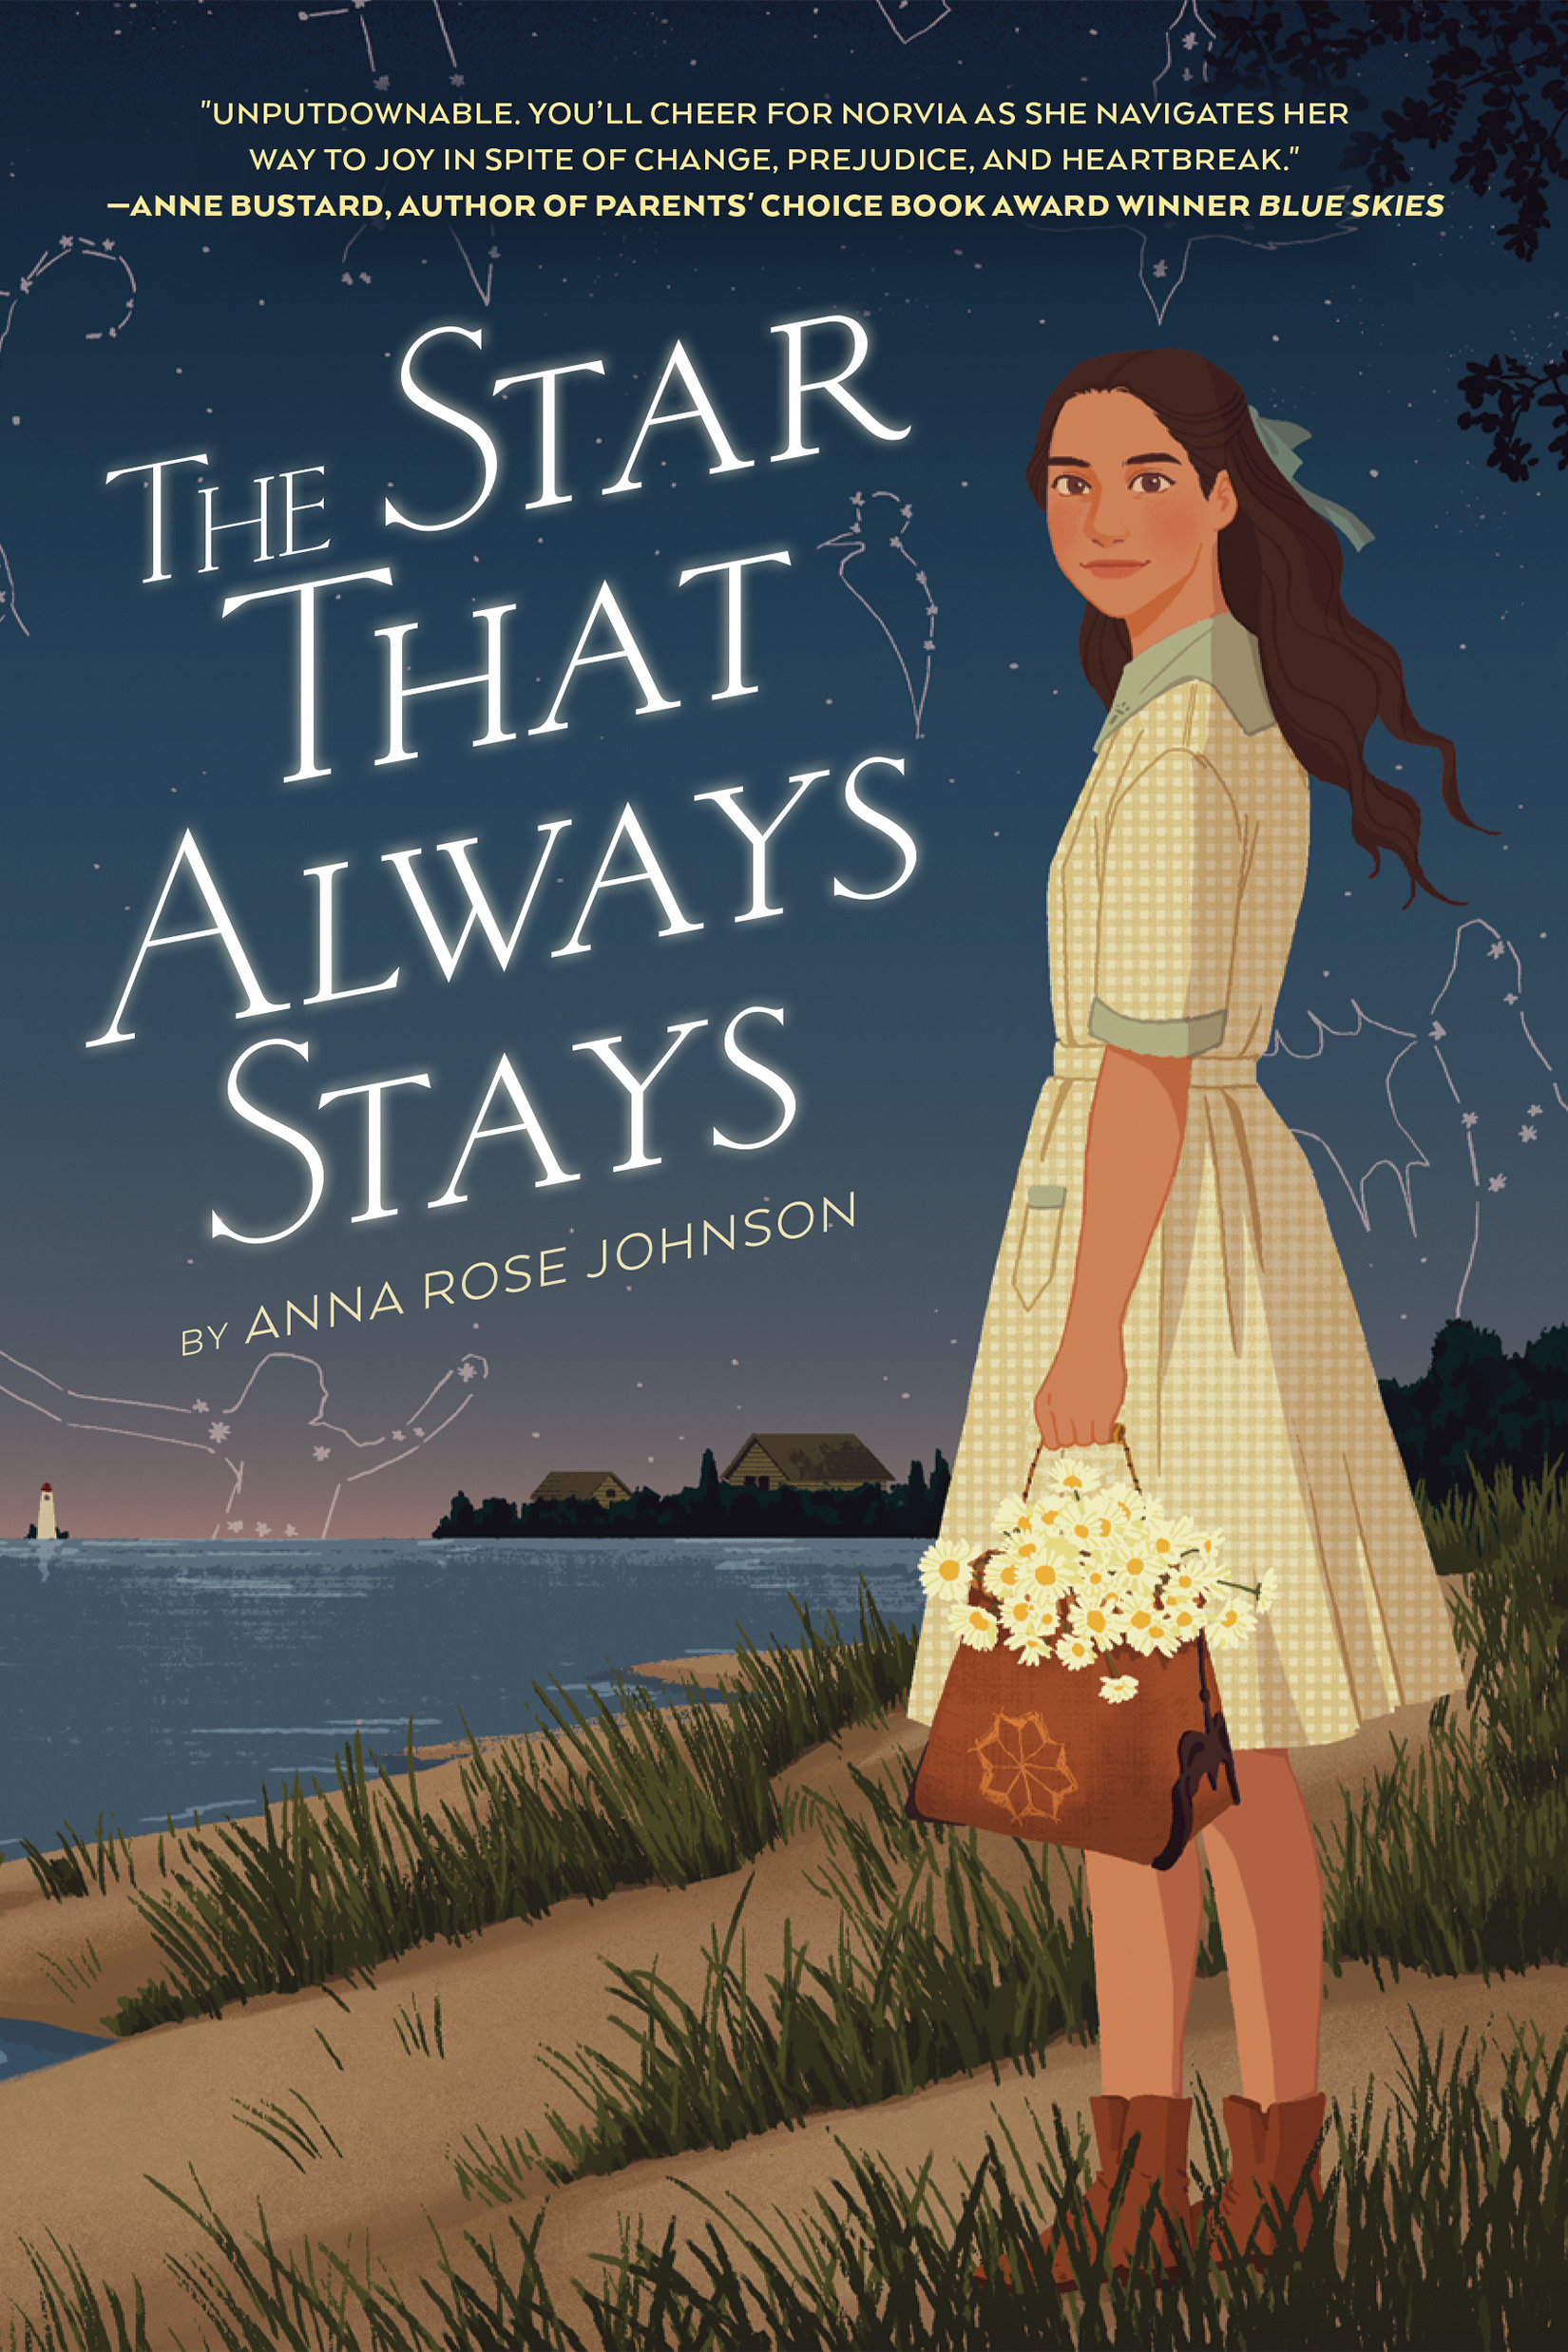 The Star That Always Stays (Hardcover Book)